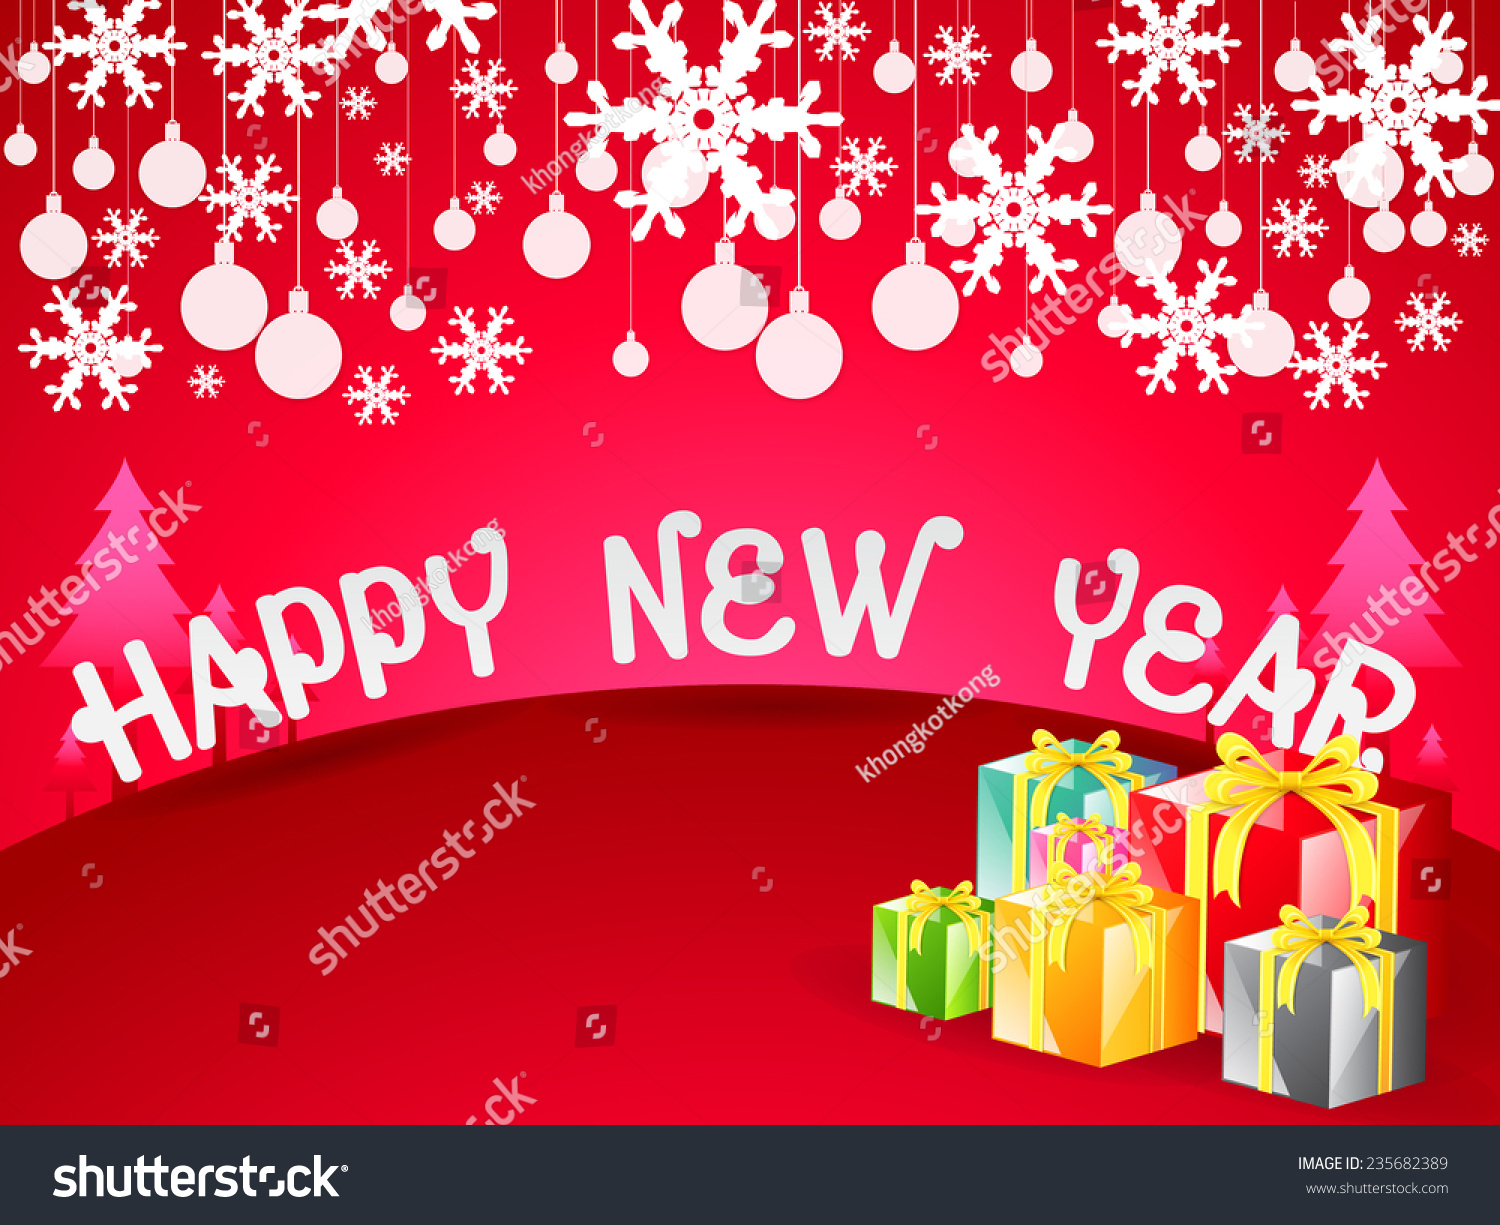 Happy News Year Wallpaper Background Stock Vector 235682389